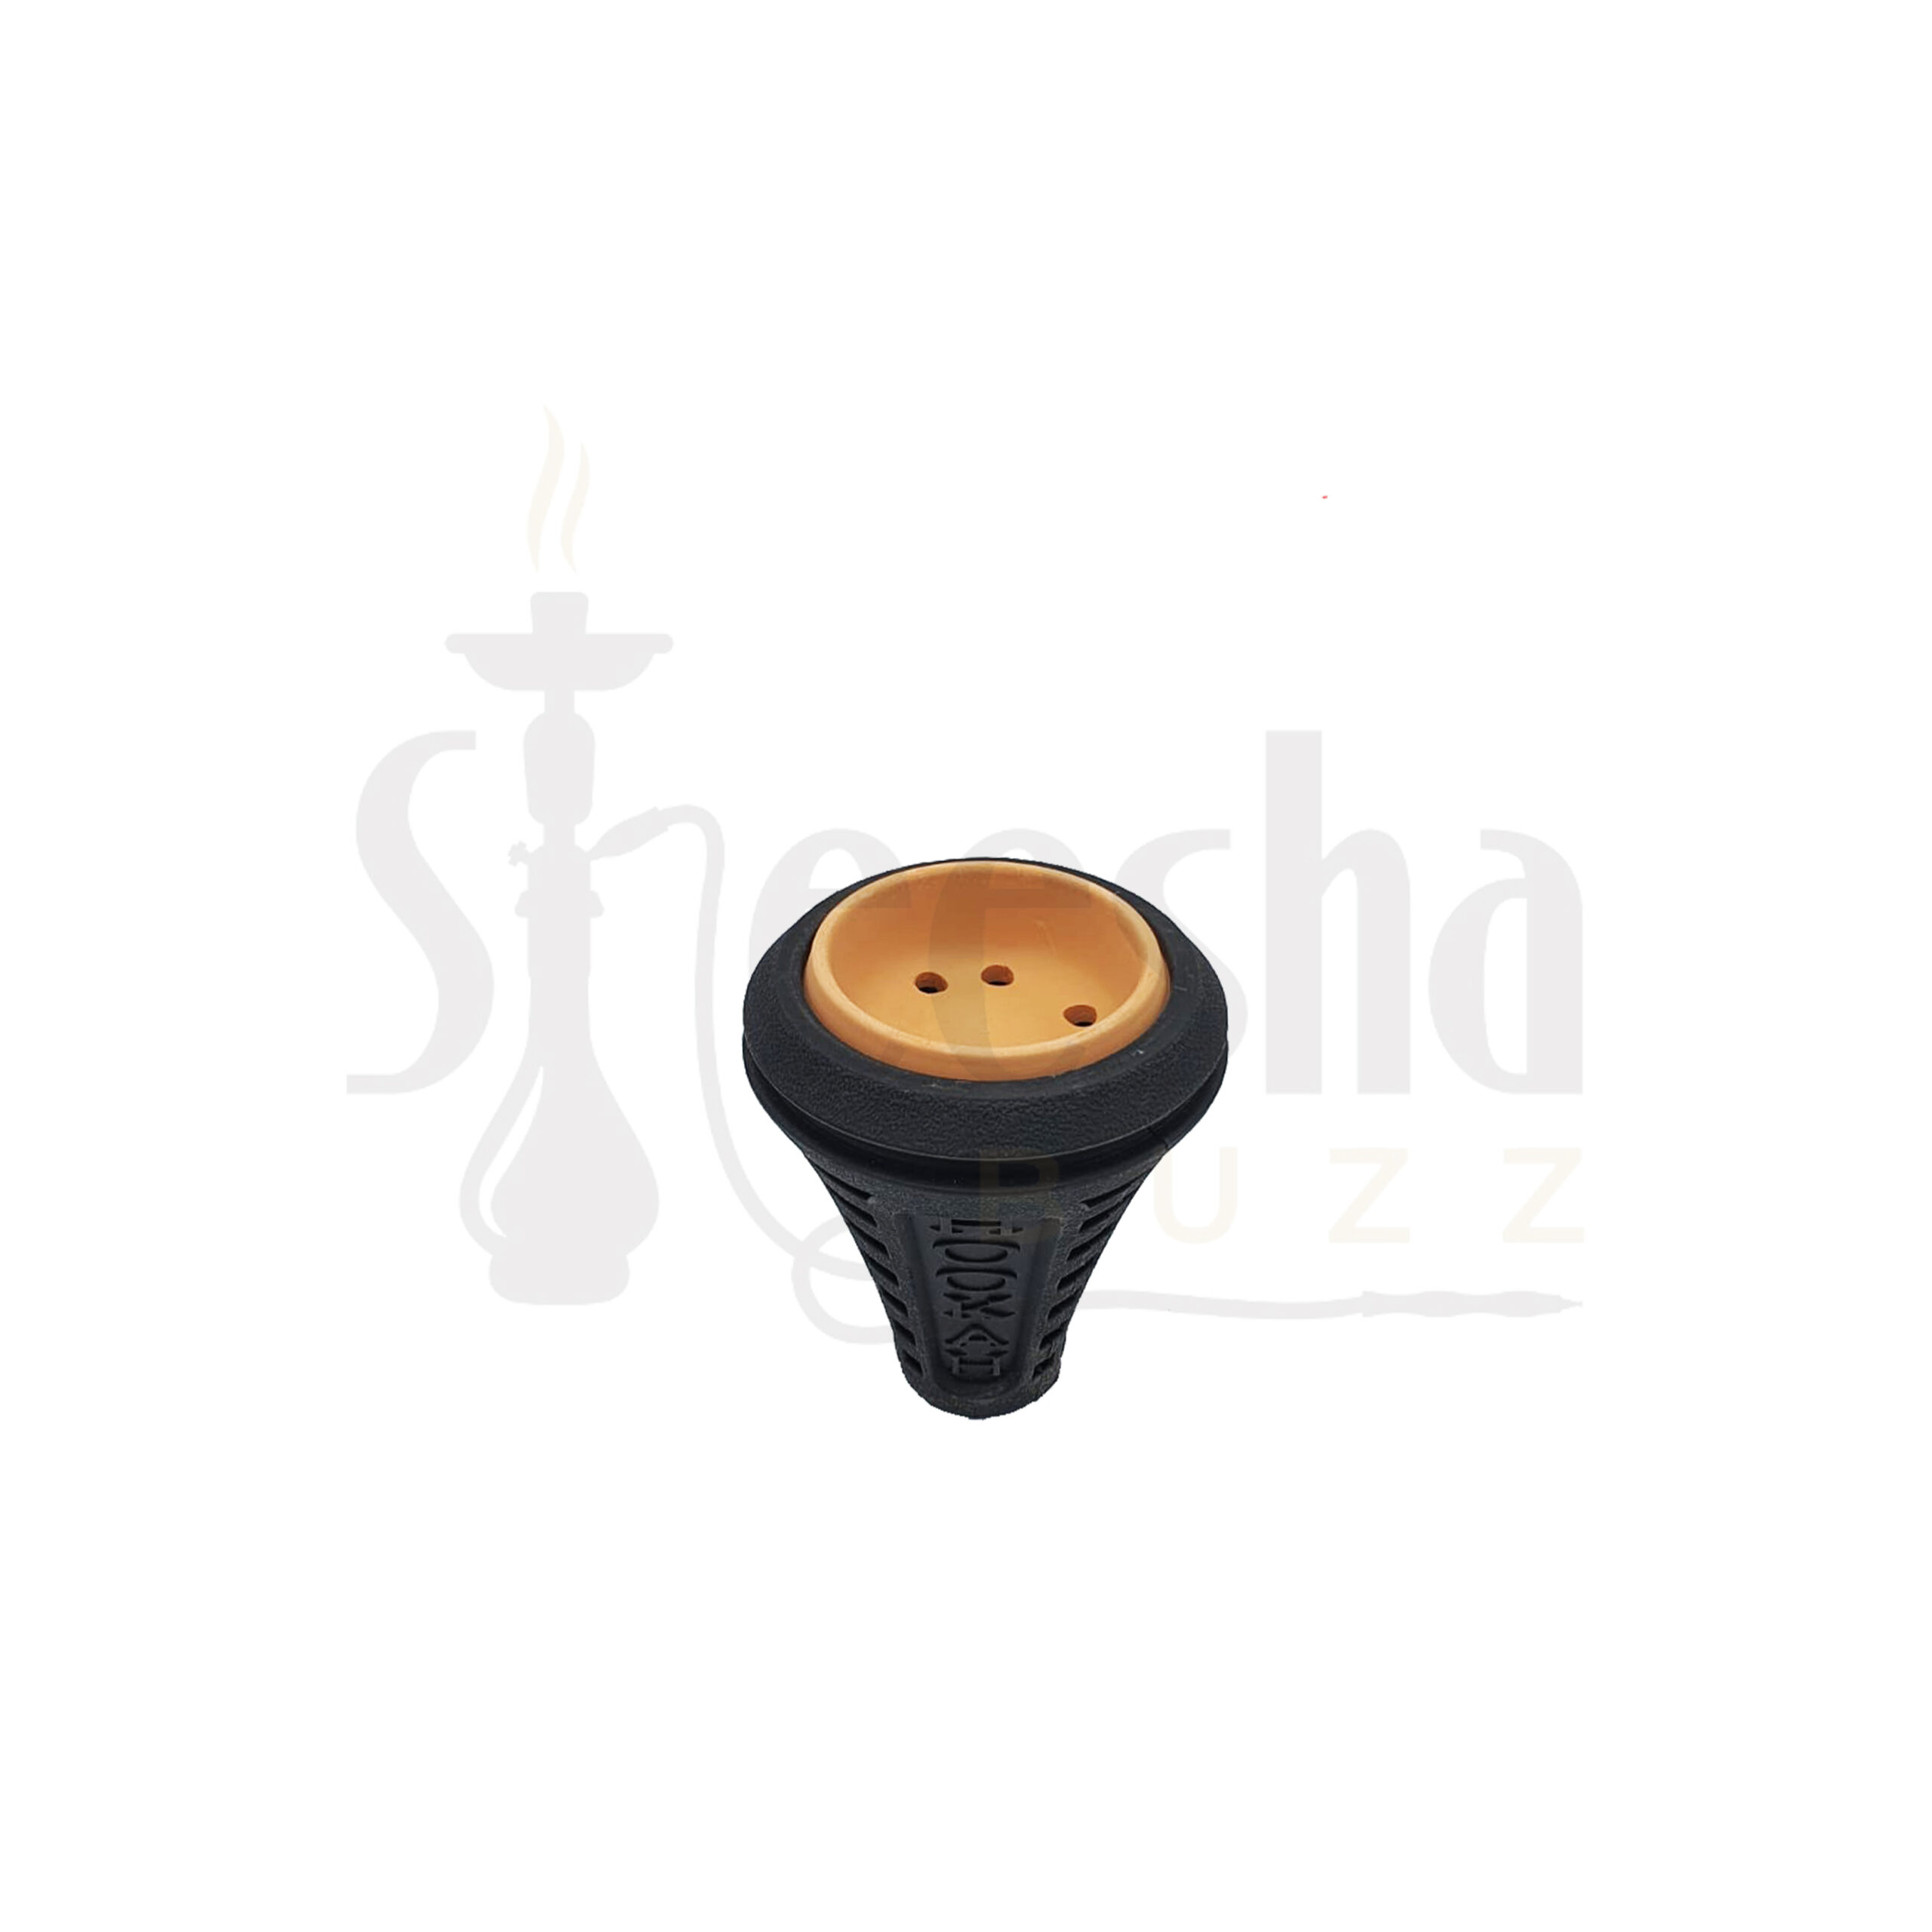 Head With Rubber Cover, Product, Sheesha Buzz